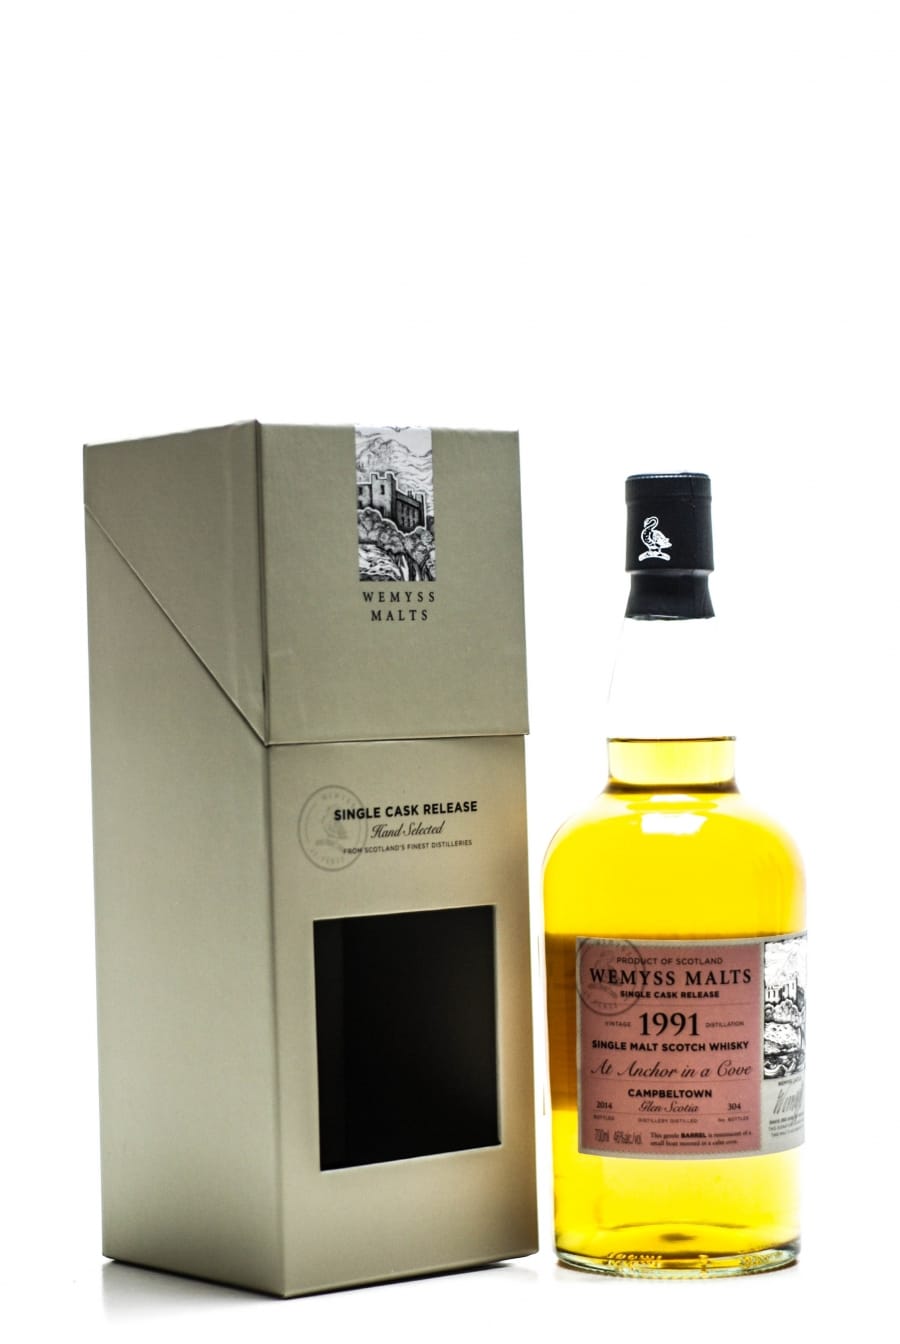 Glen Scotia  - Wemyss Malts At Anchor in a Cove 46% 1991 In Original Container